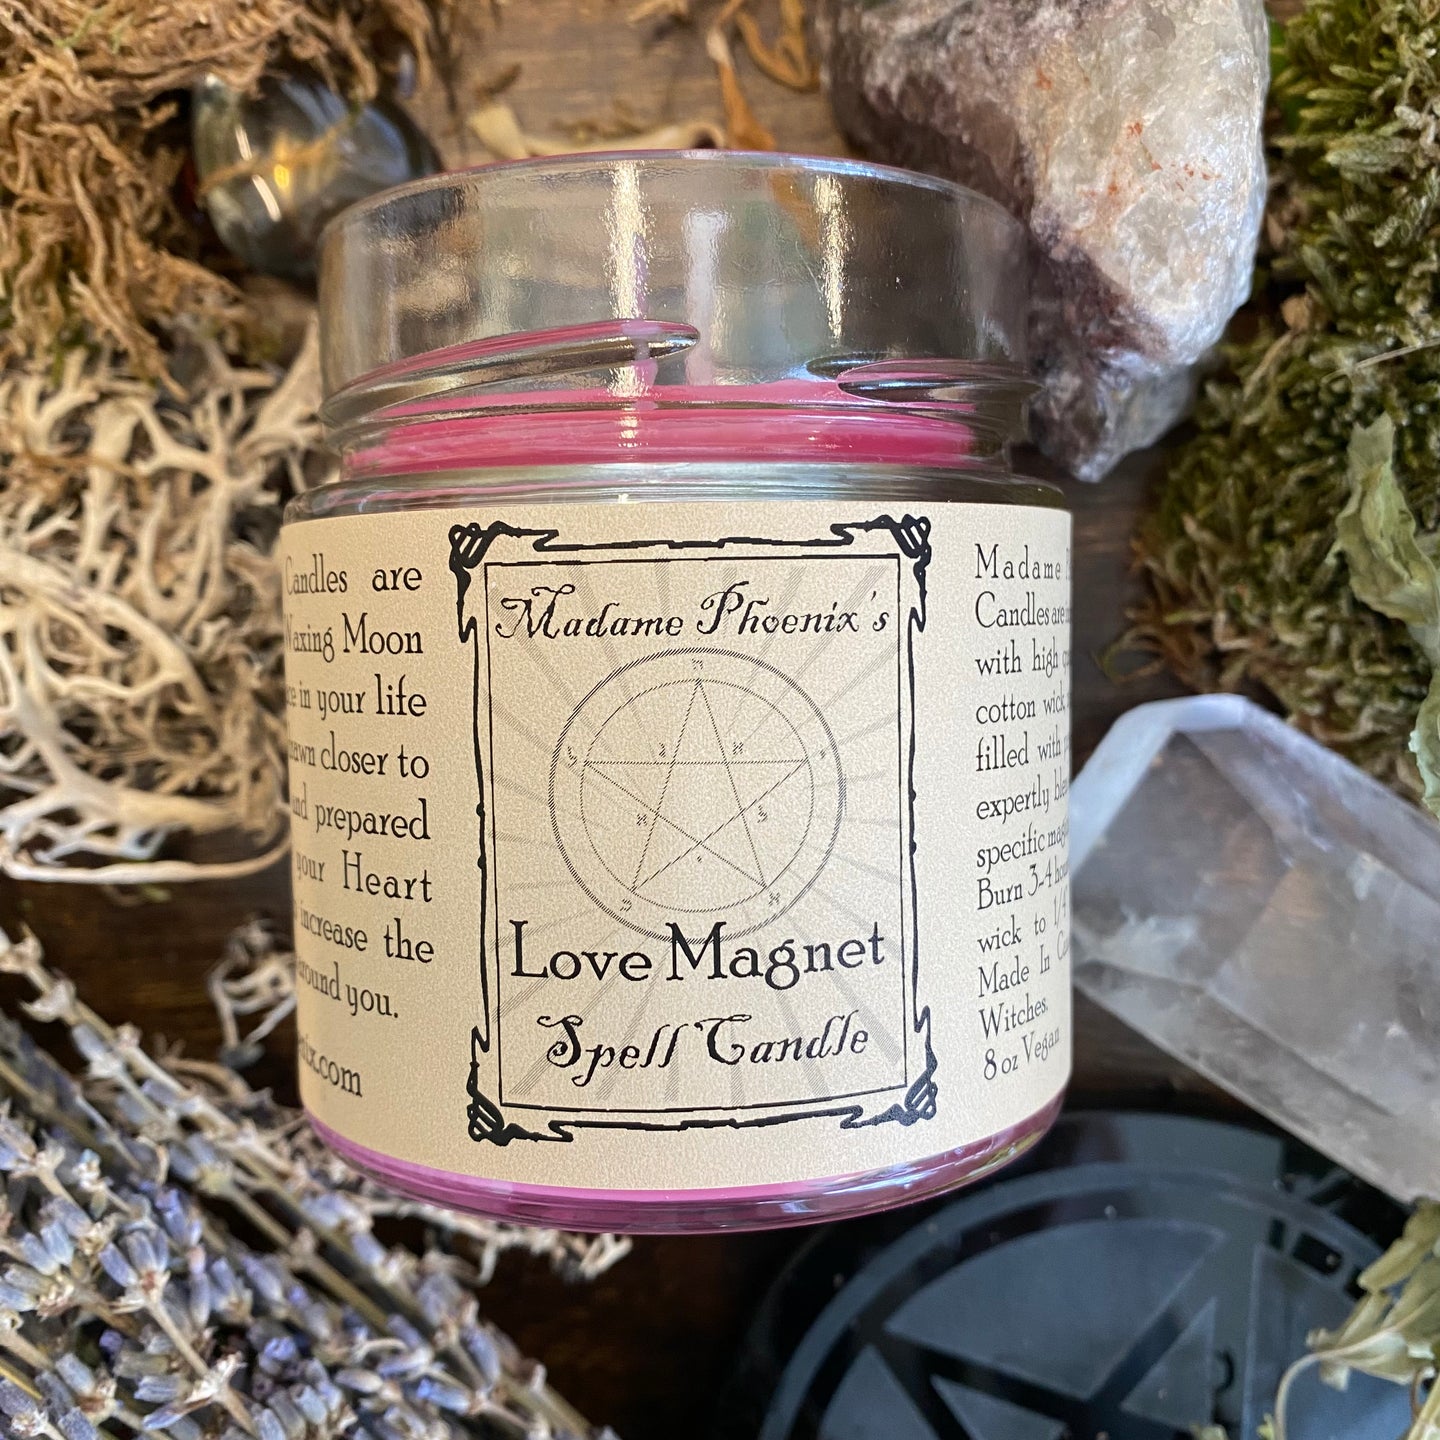 Love Magnet Magic Spell Candle